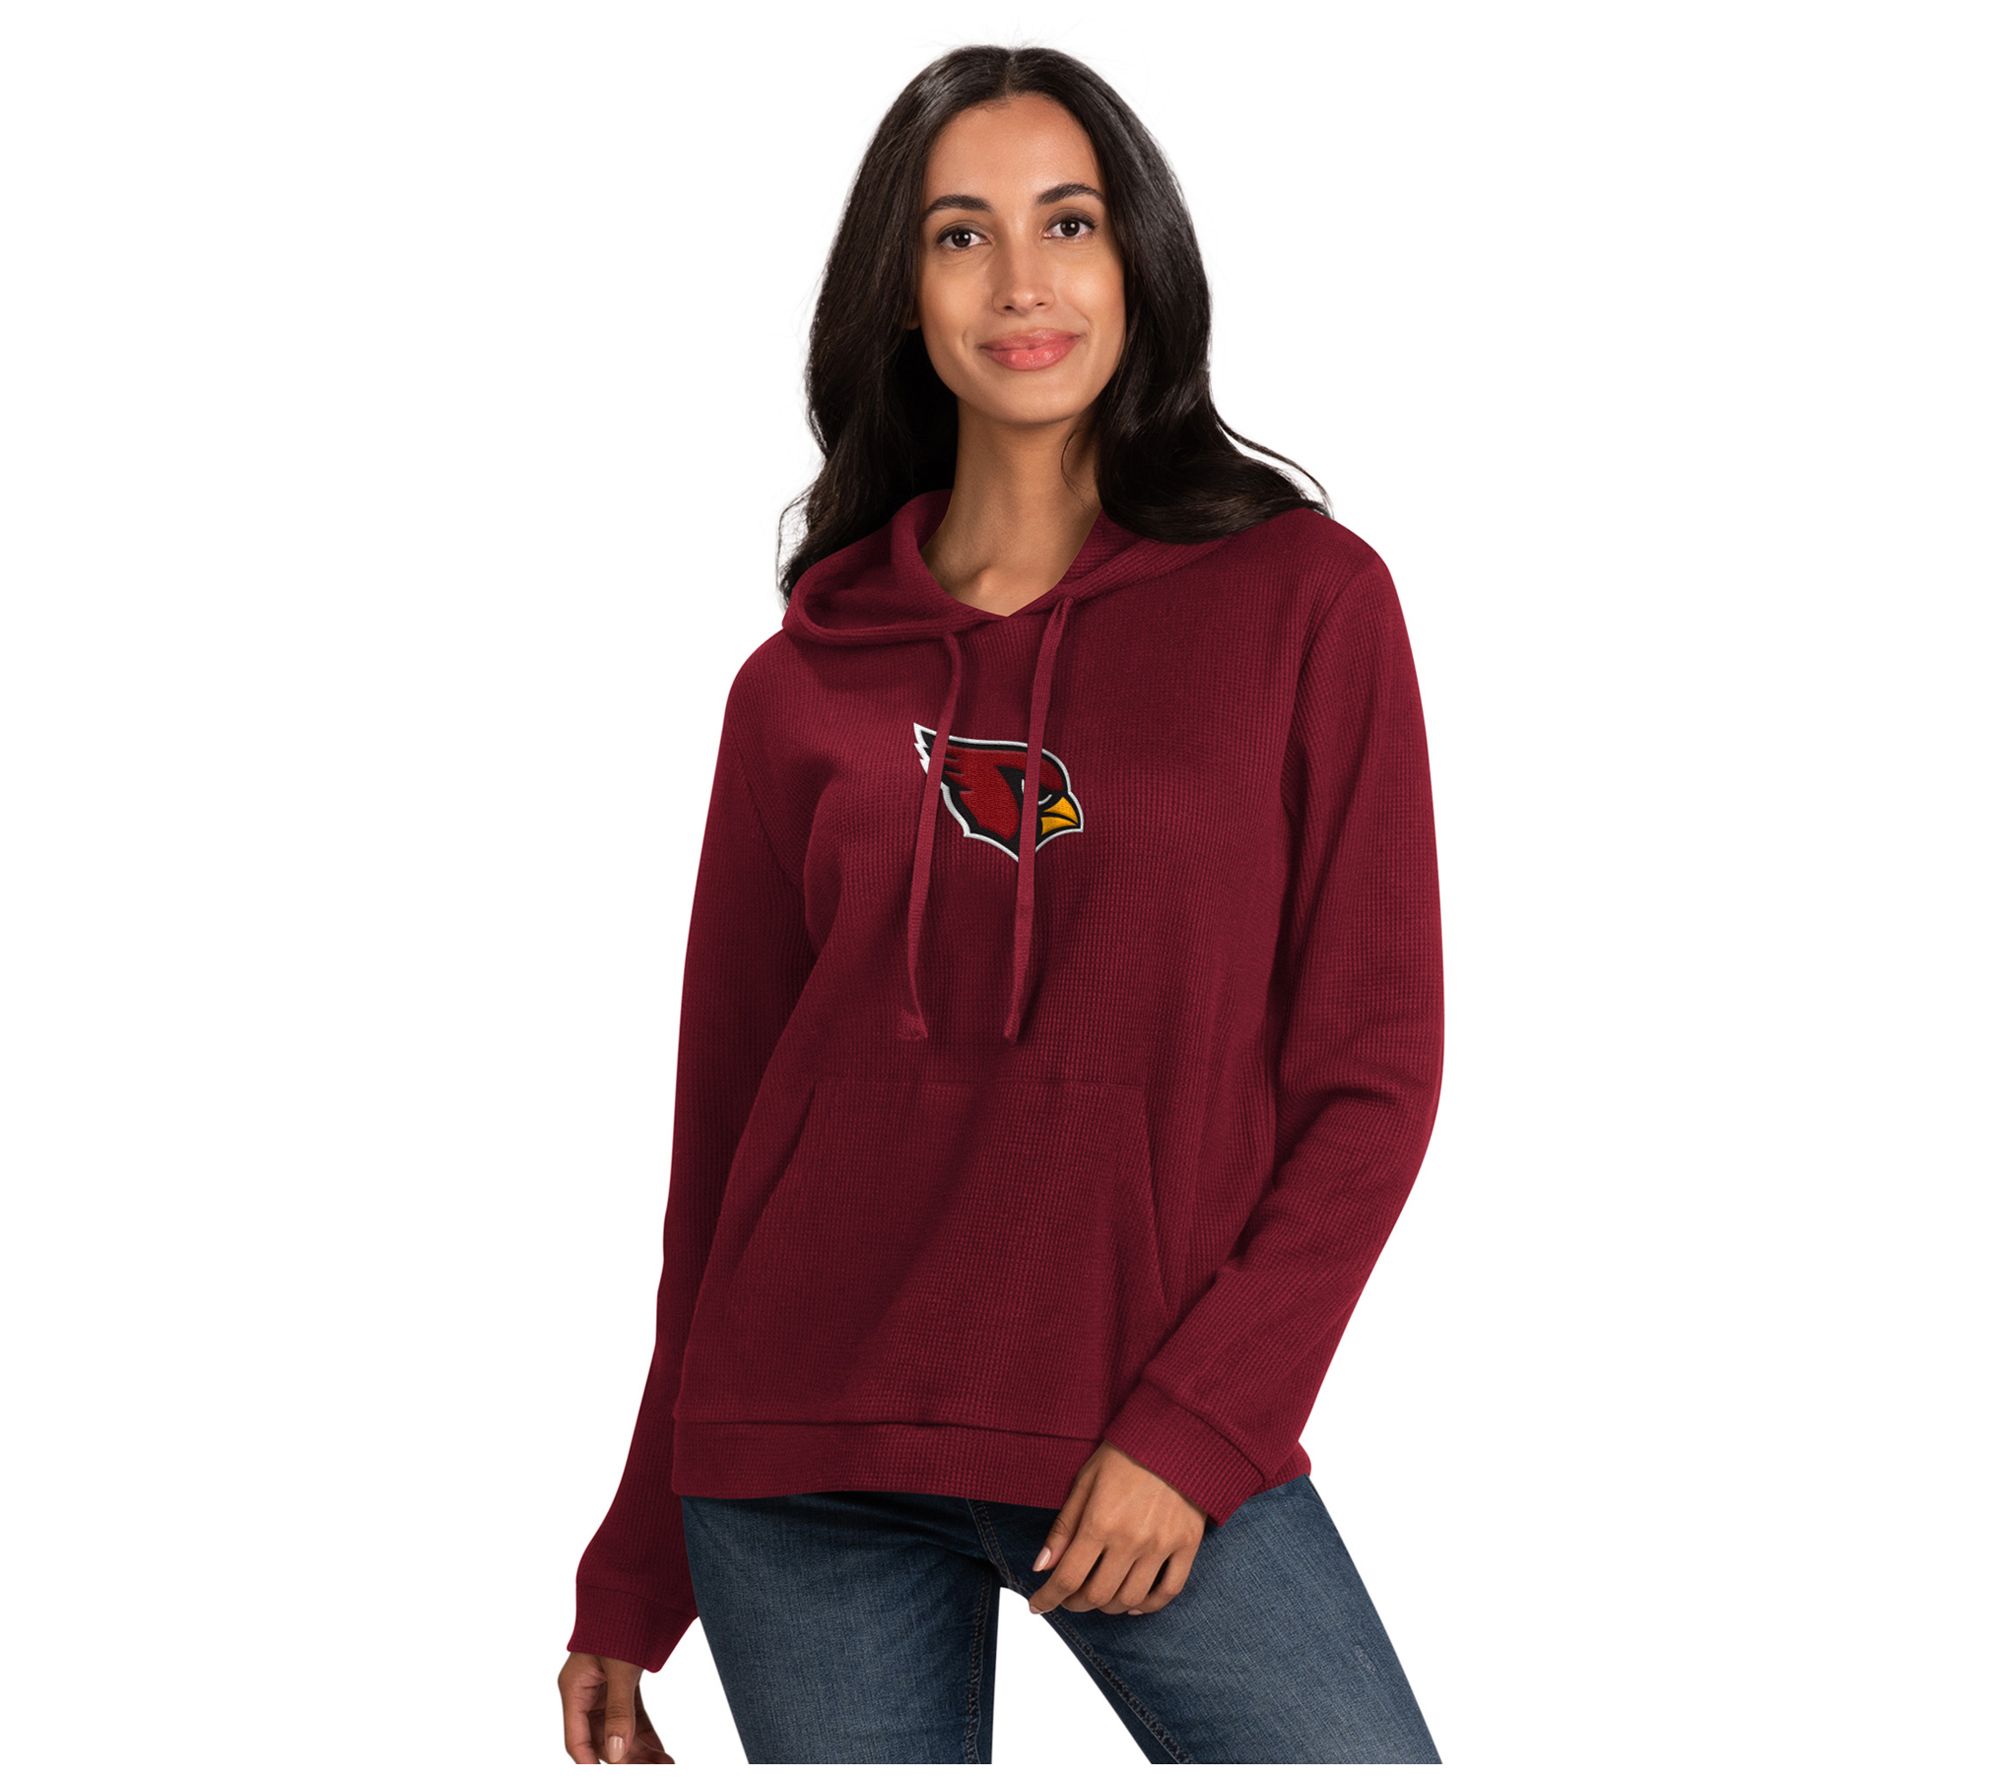 NFL Women's Waffle Knit Pullover Hoodie